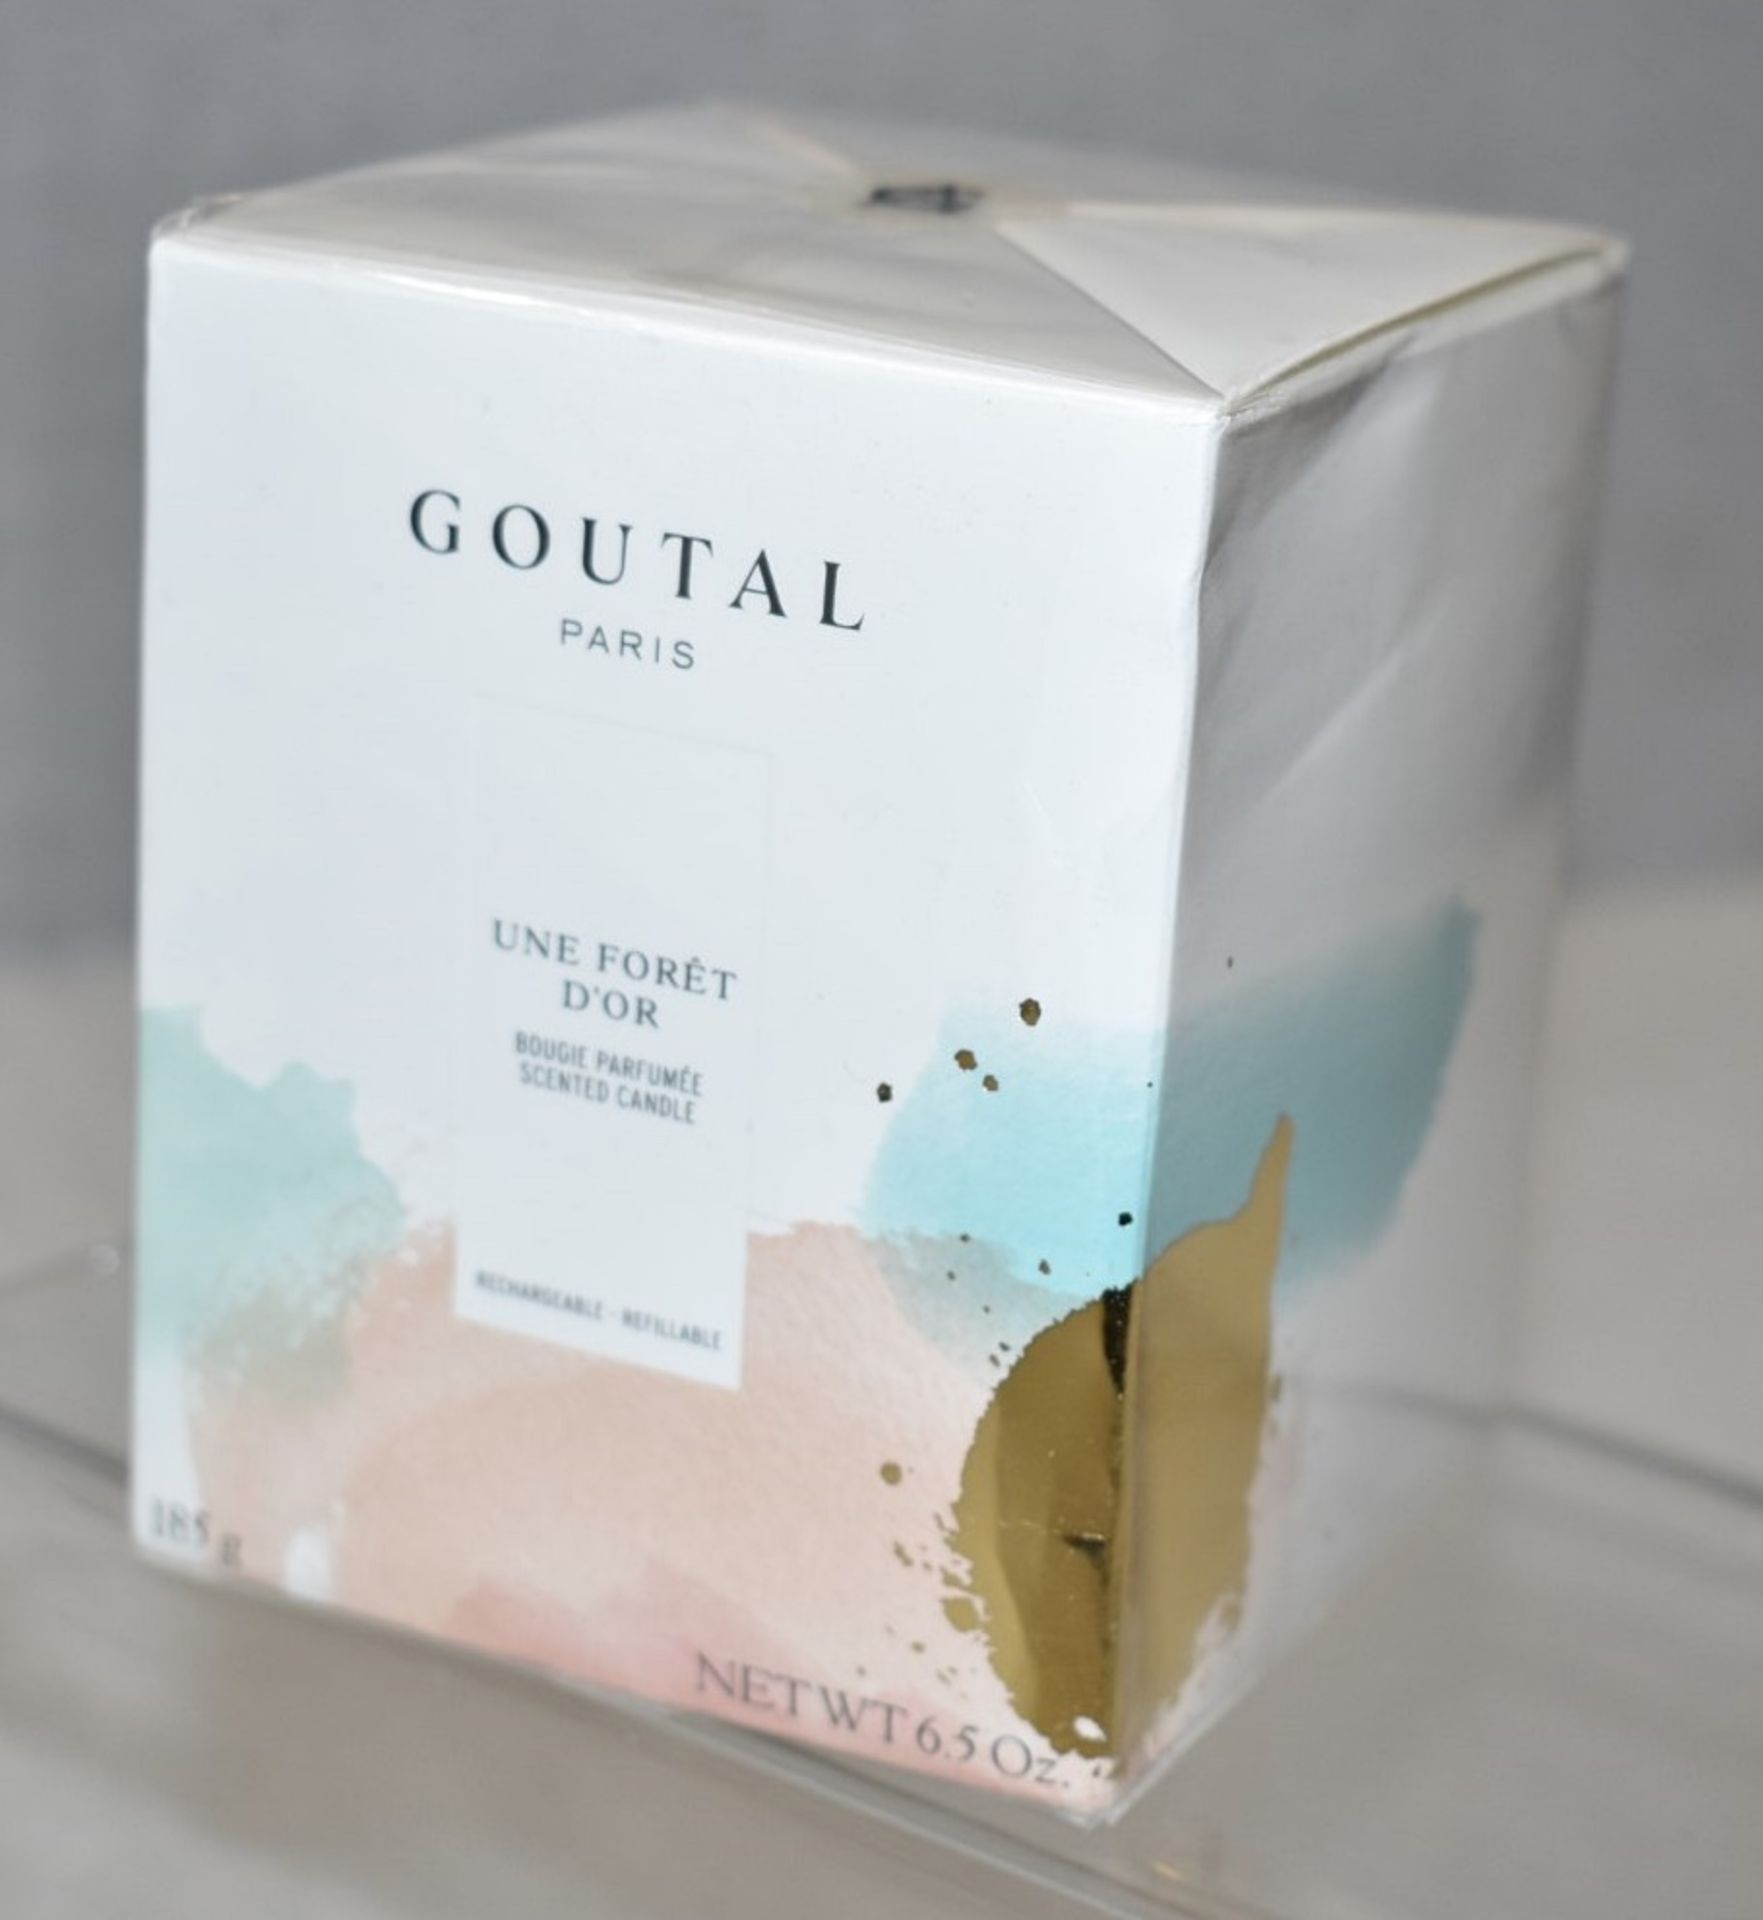 1 x GOUTAL PARIS Une Forêt d'Or Luxury Scented Candle (185g) - Sealed/Boxed - Original Price £57.00 - Image 4 of 4